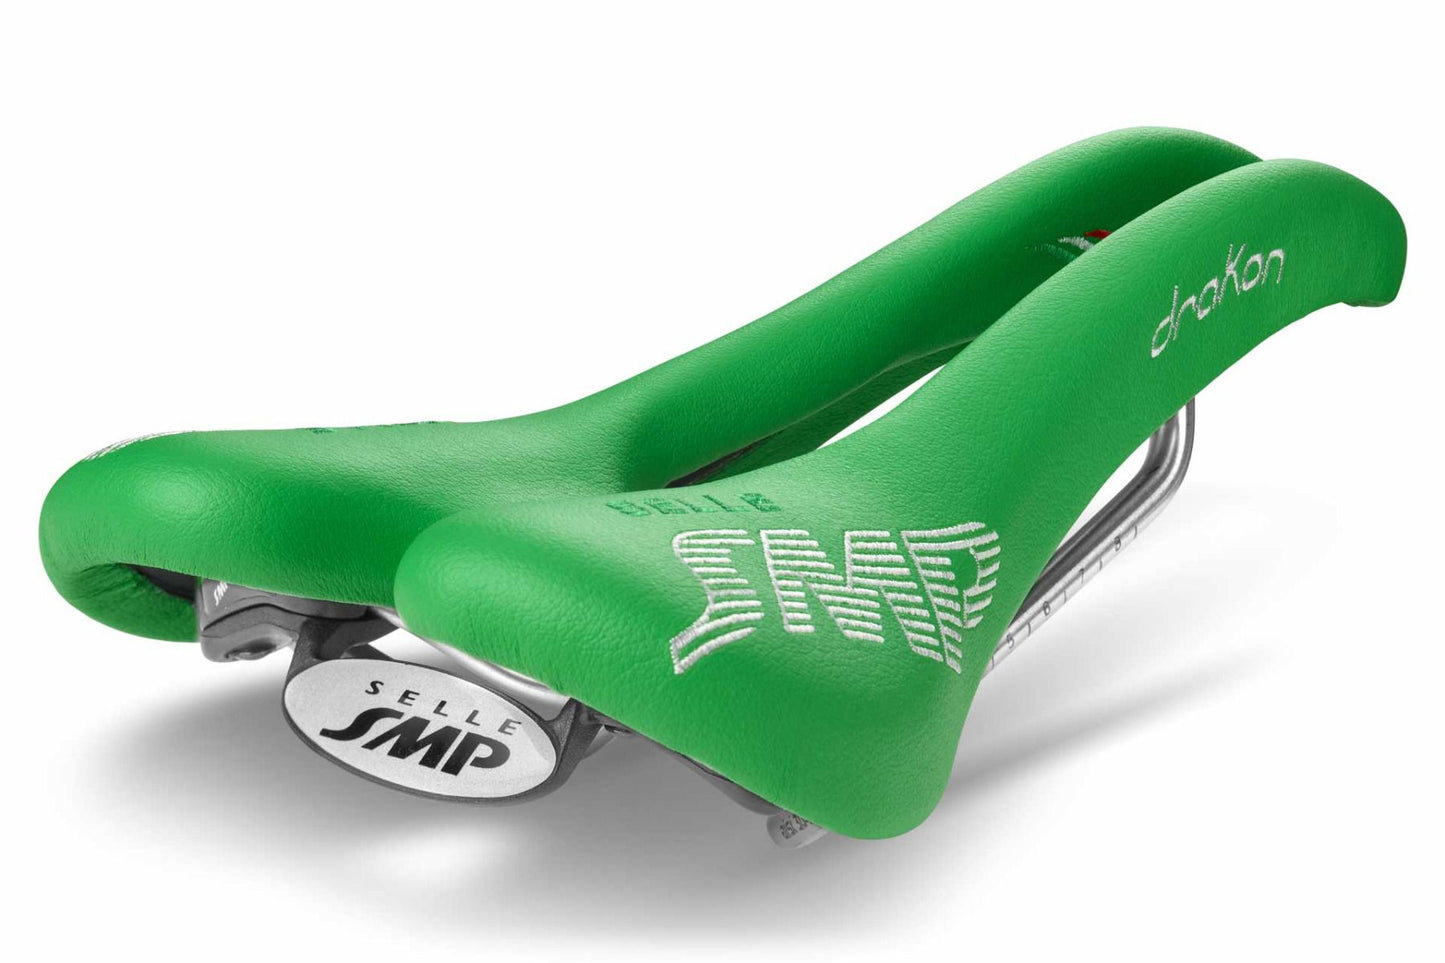 Selle SMP Drakon Saddle with Steel Rails (Green)